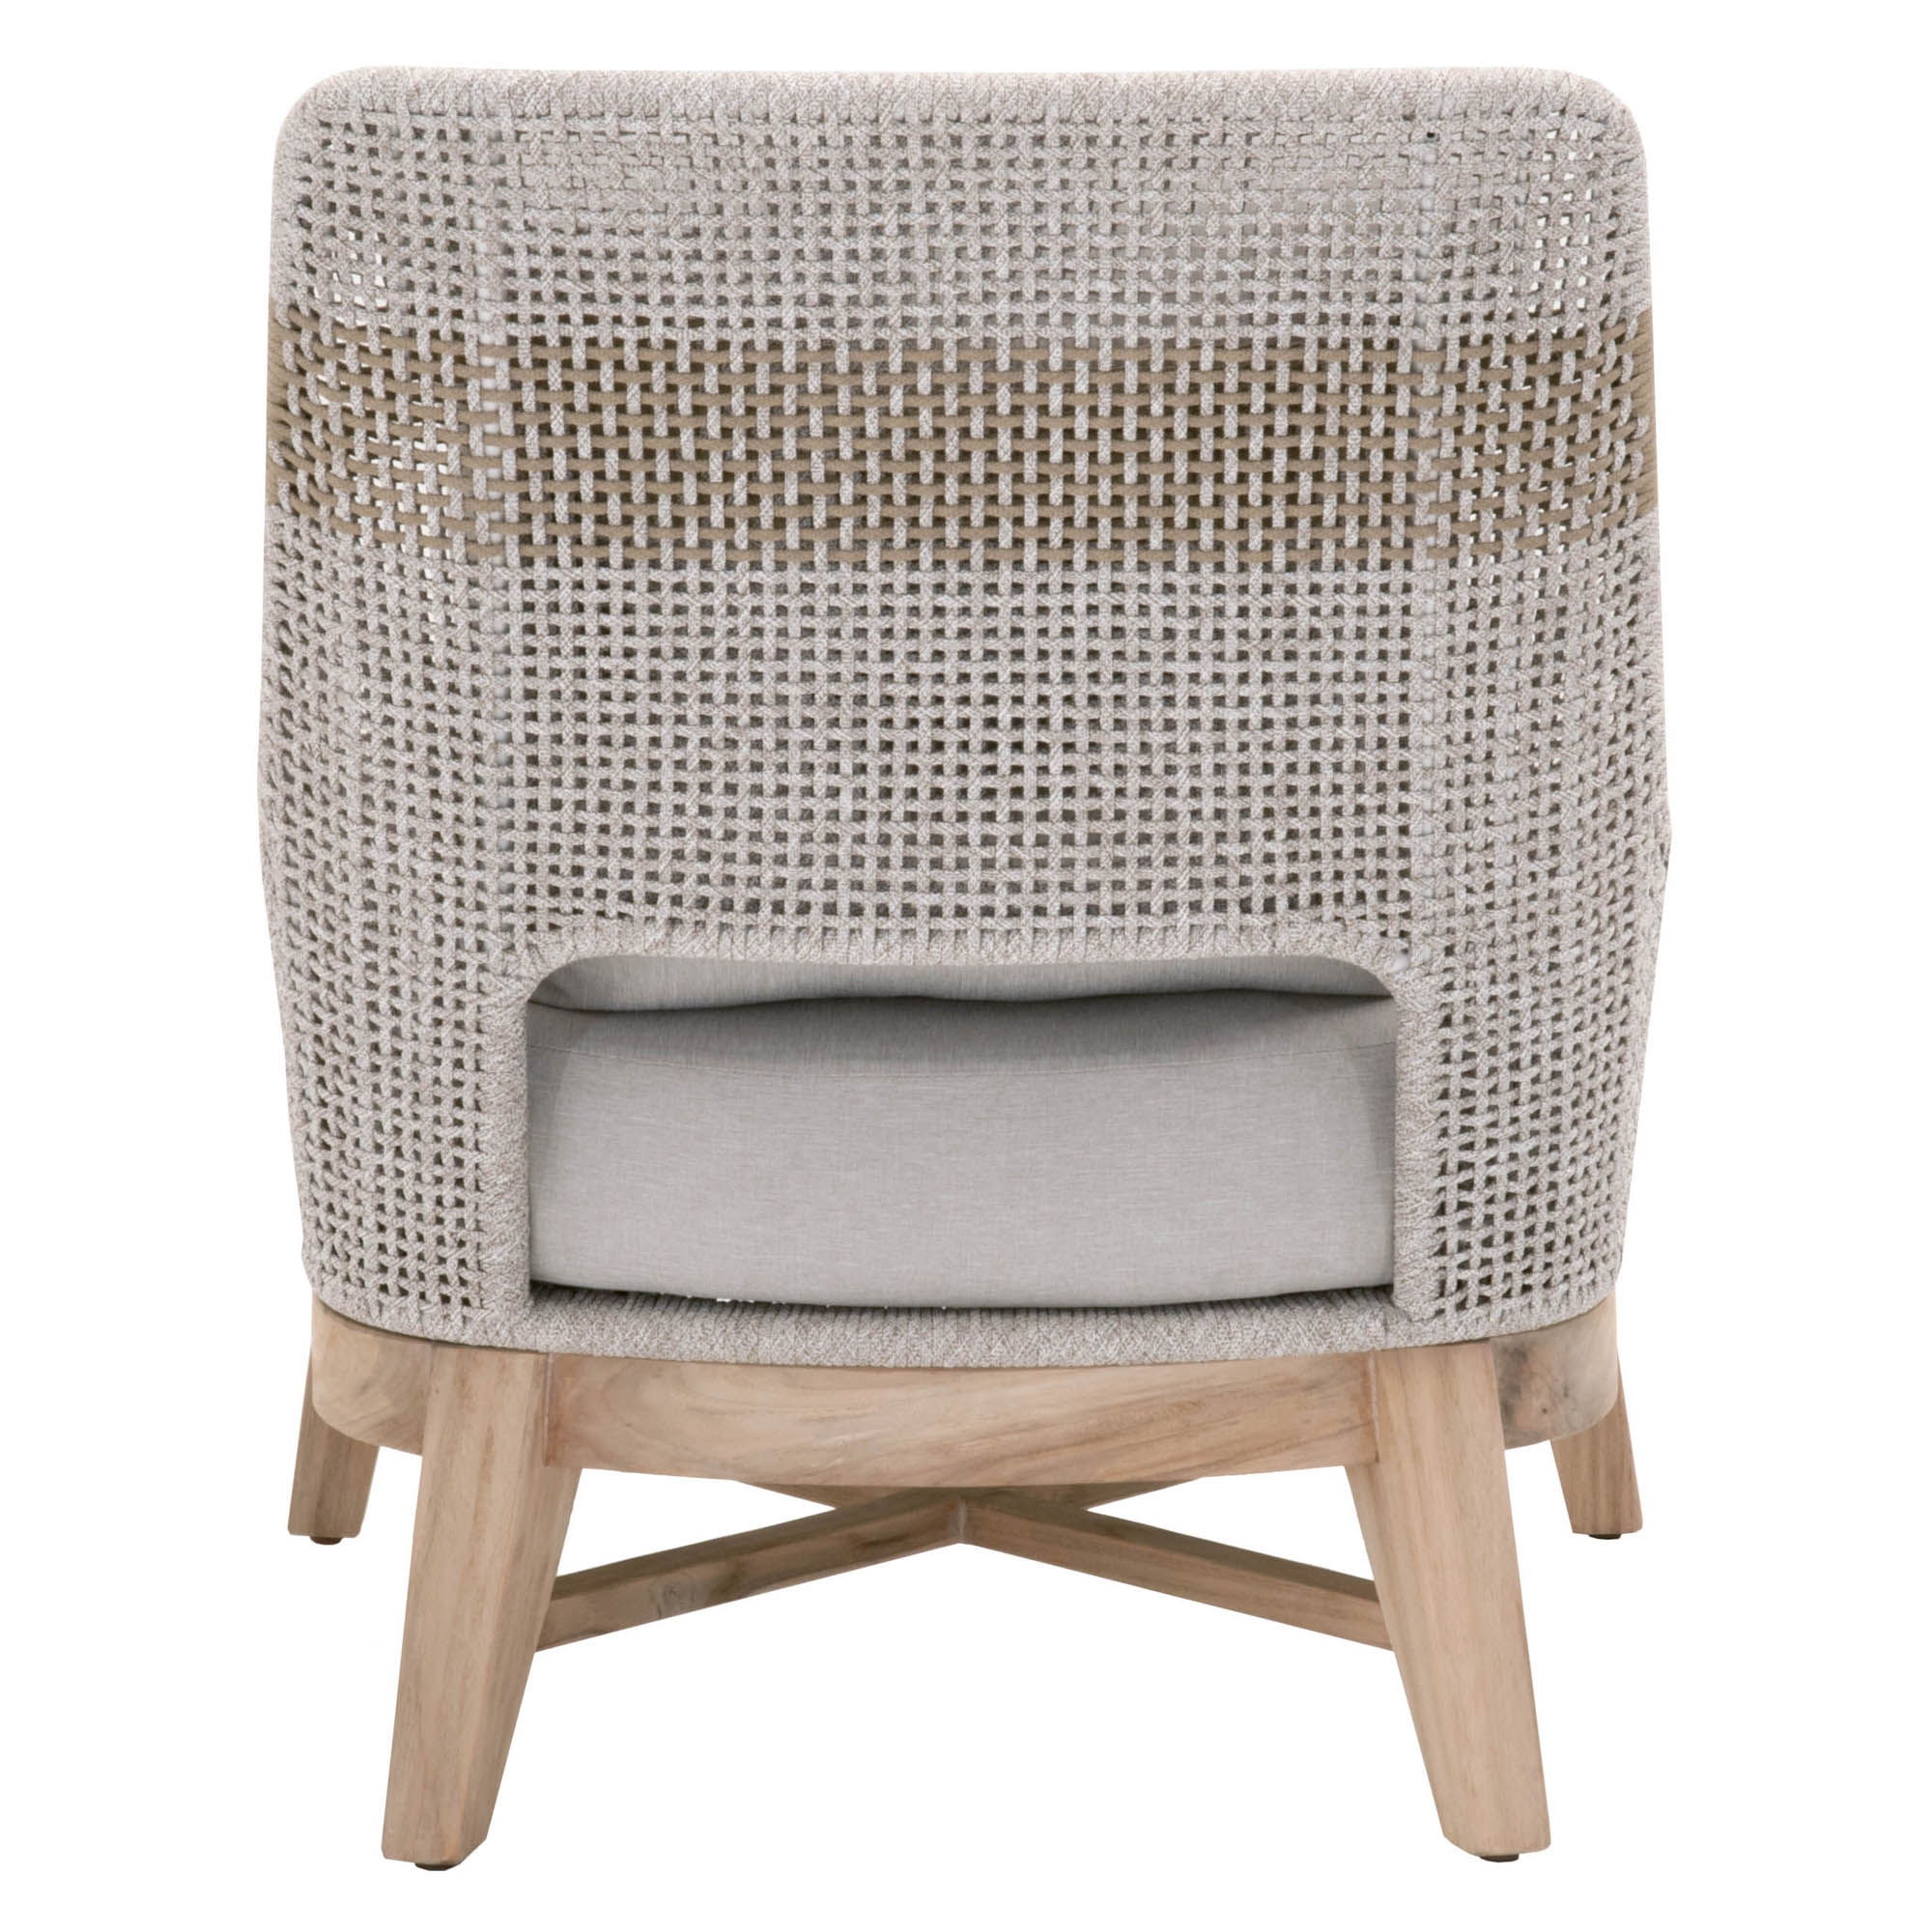 Tapestry Outdoor Club Chair, Taupe - Image 4